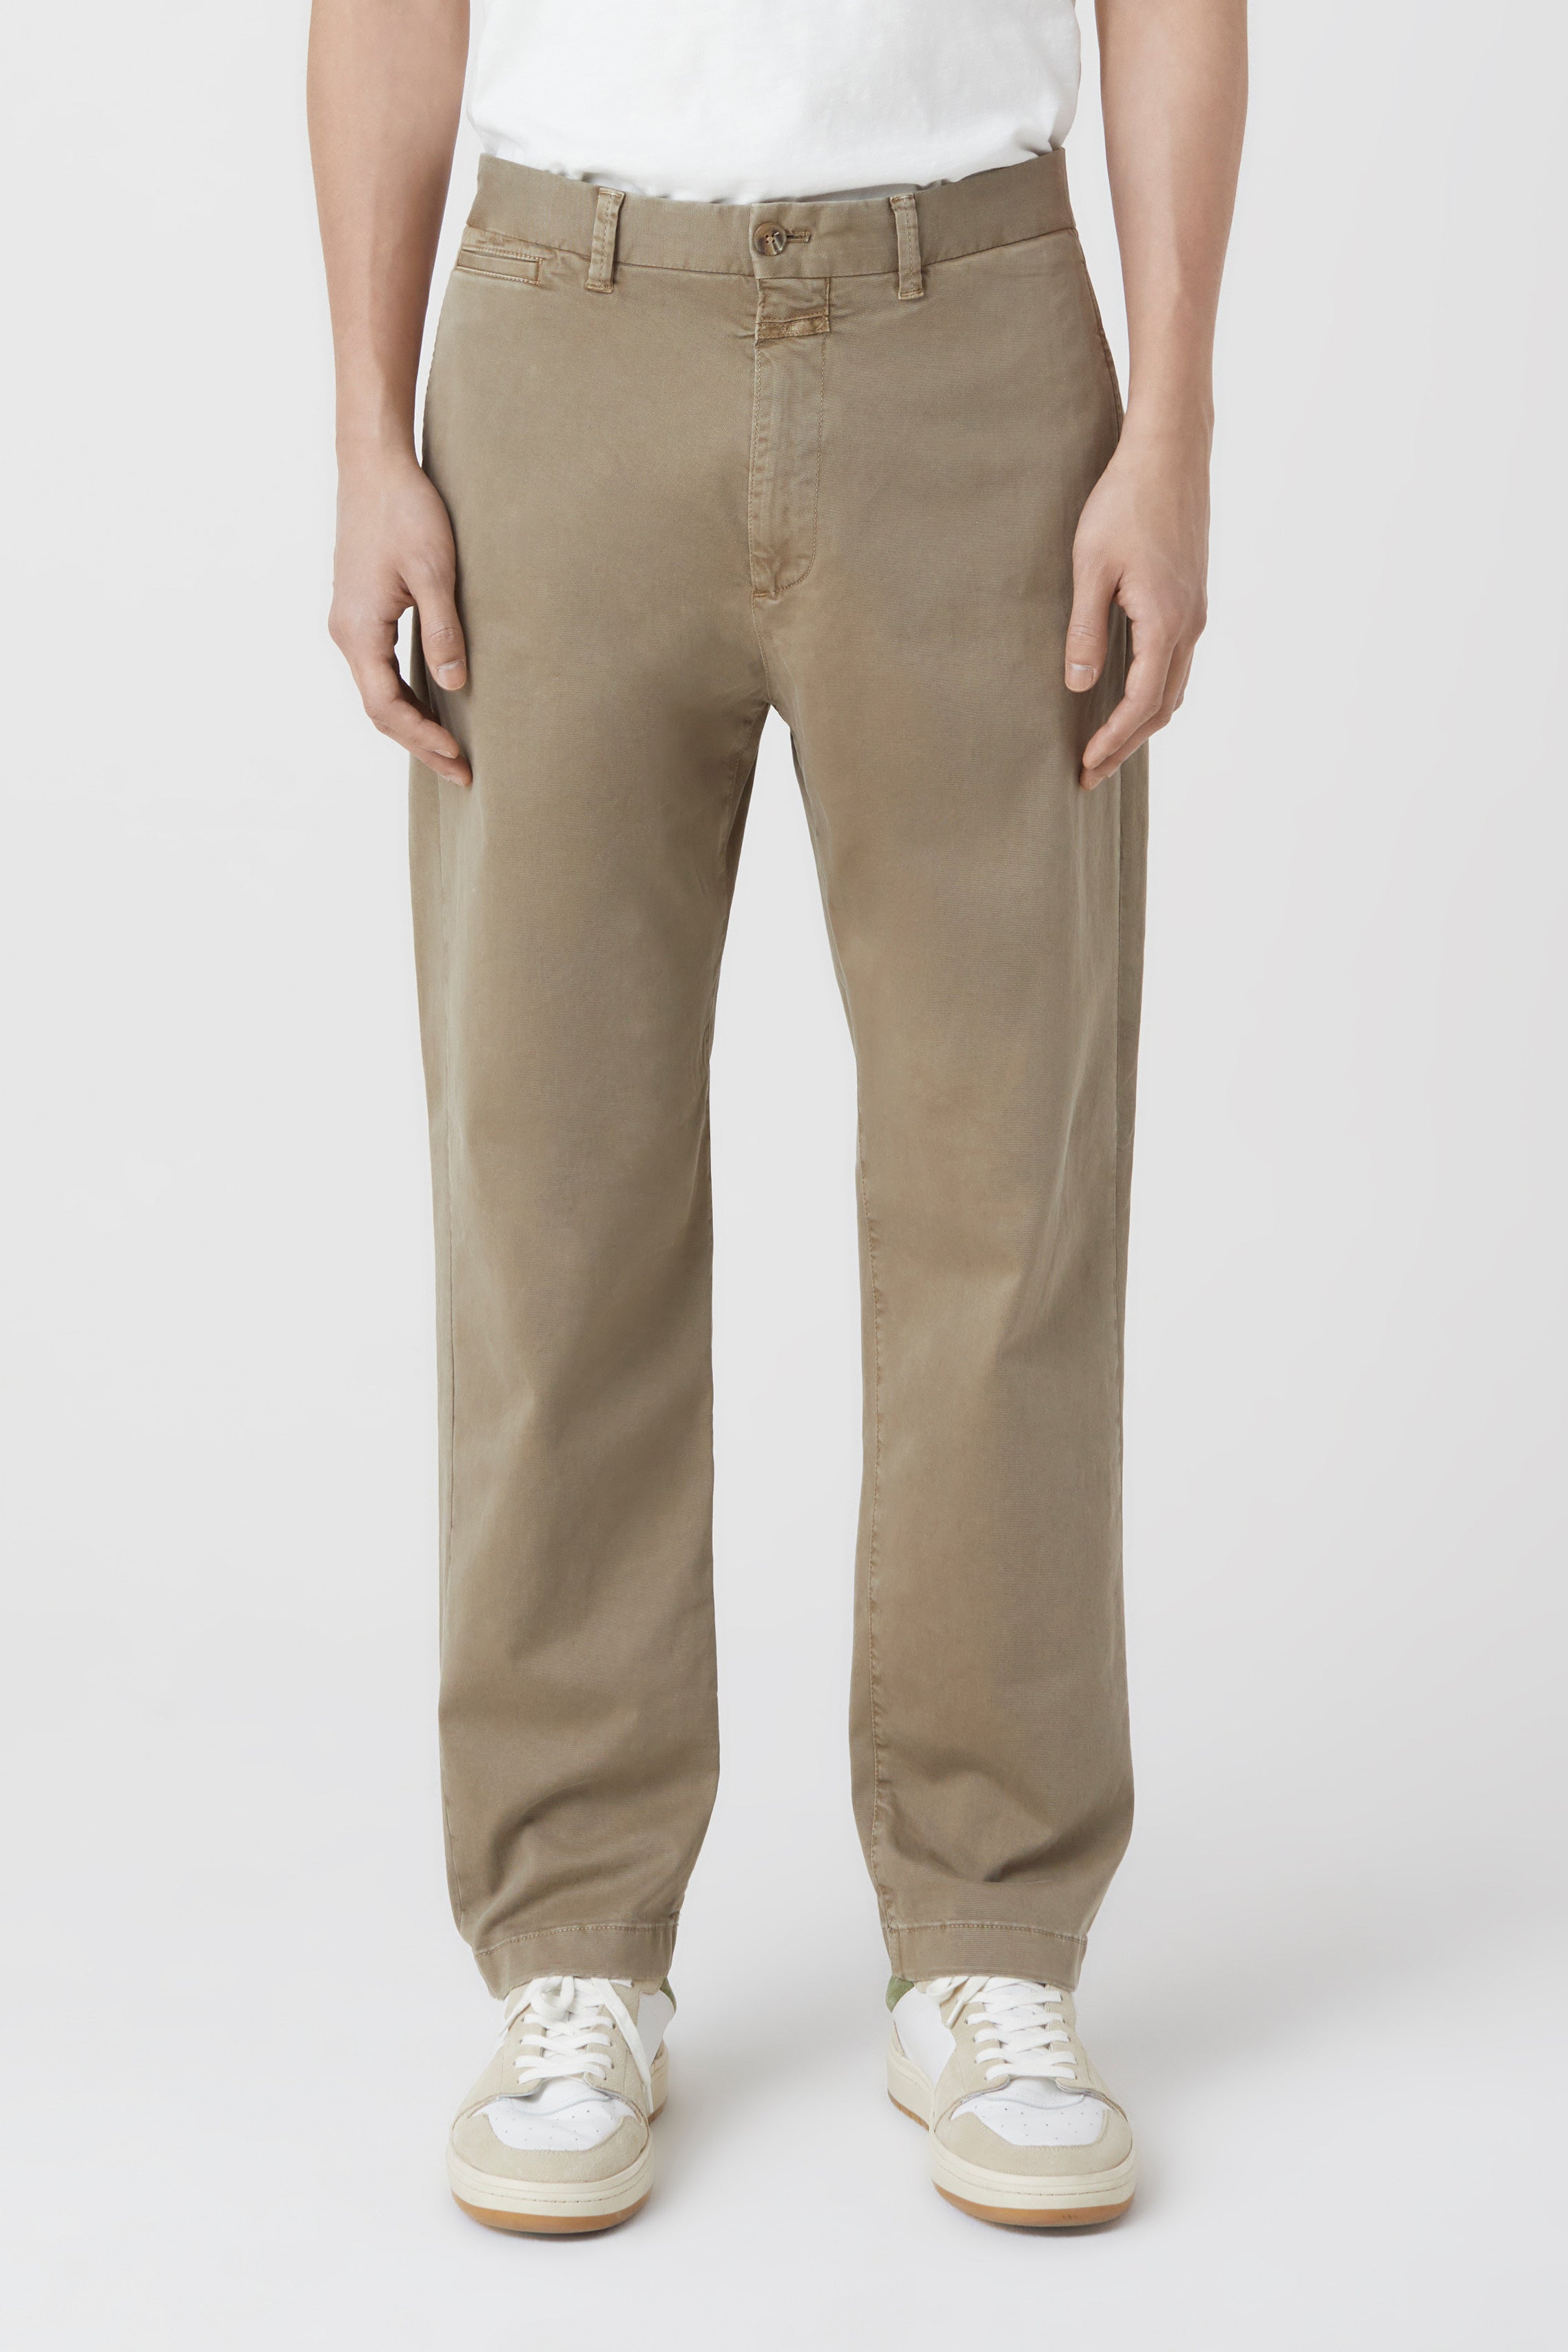 CLOSED-OUTLET-SALE-STYLE-NAME-TACOMA-TAPERED-PANTS-Hosen-ARCHIVE-COLLECTION-2_6d54b3ac-3a05-4c45-8b1f-44f22971d37d.jpg